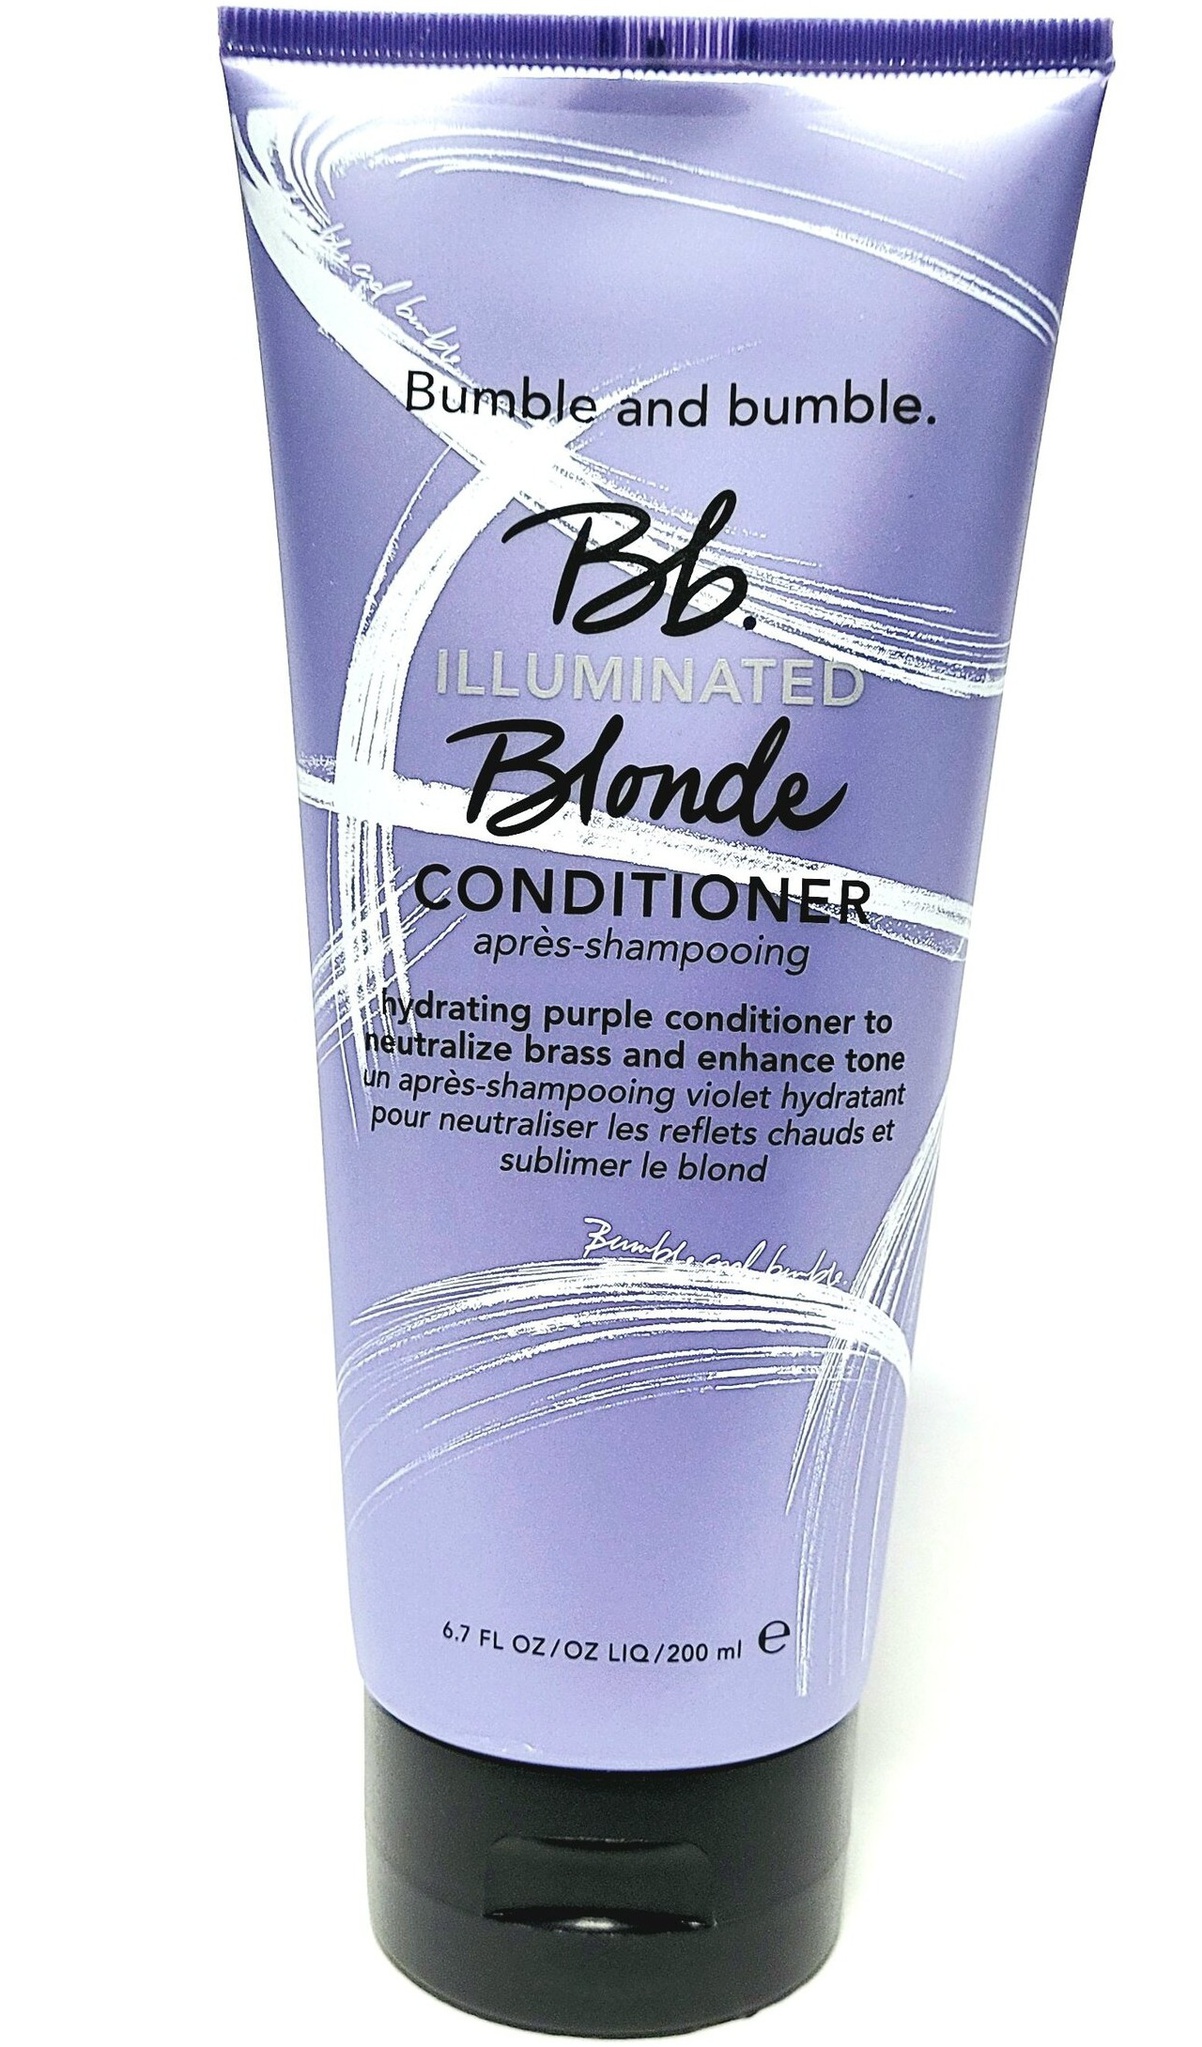 Bumble And Bumble Illuminated Blonde Conditioner